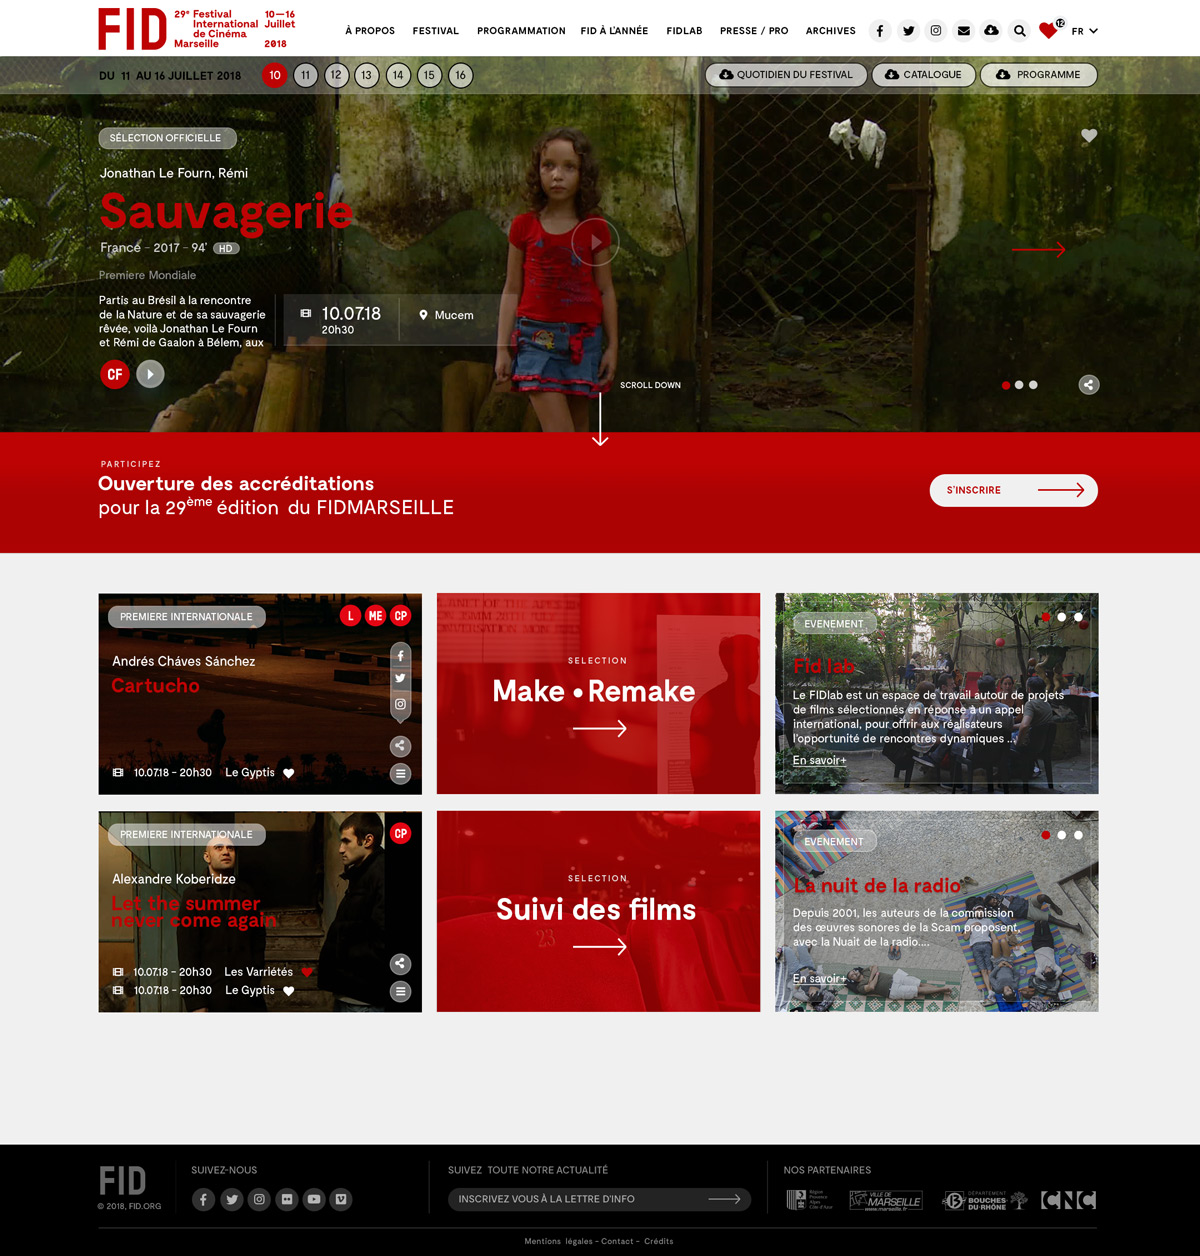 Design Home Page